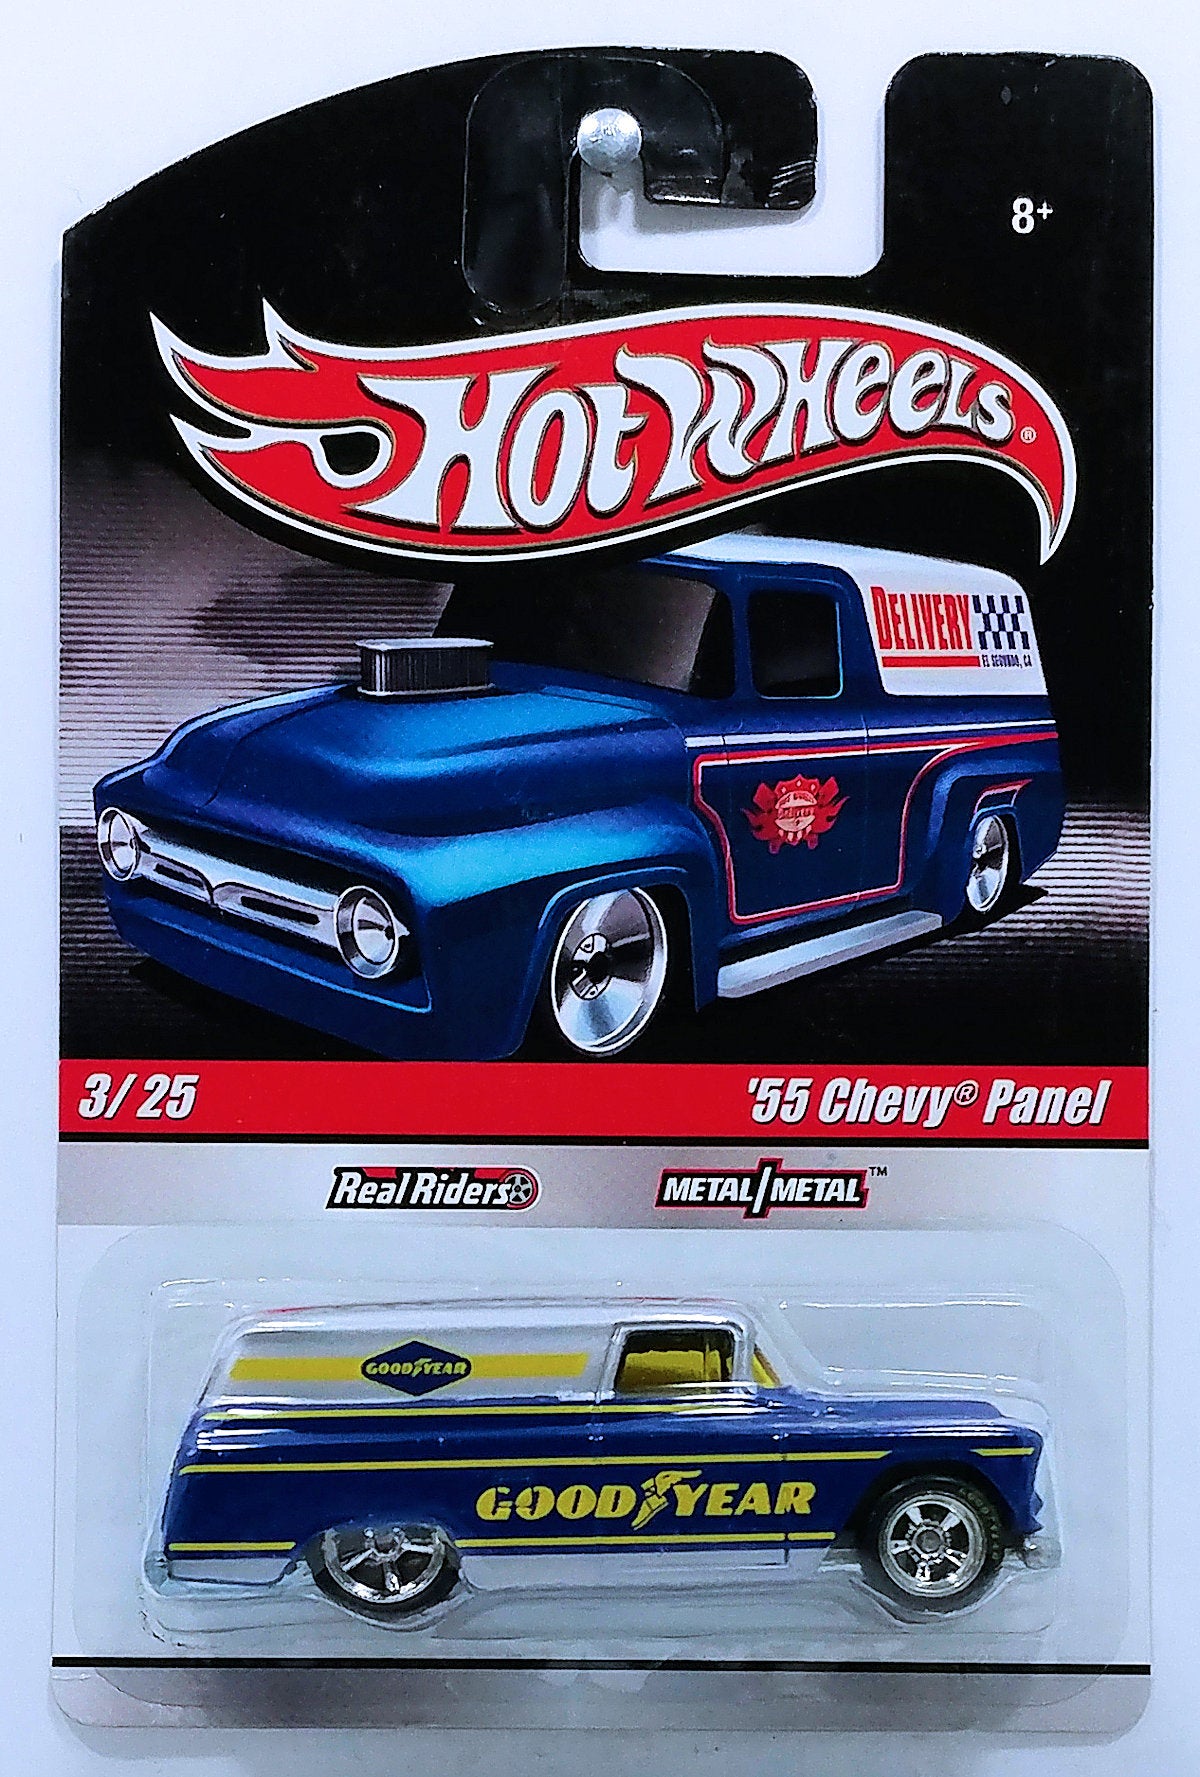 Hot Wheels 2010 - Delivery / Slick Rides 03/25 - '55 Chevy Panel - Silver & Blue / Good Year - Metal/Metal & Real Riders